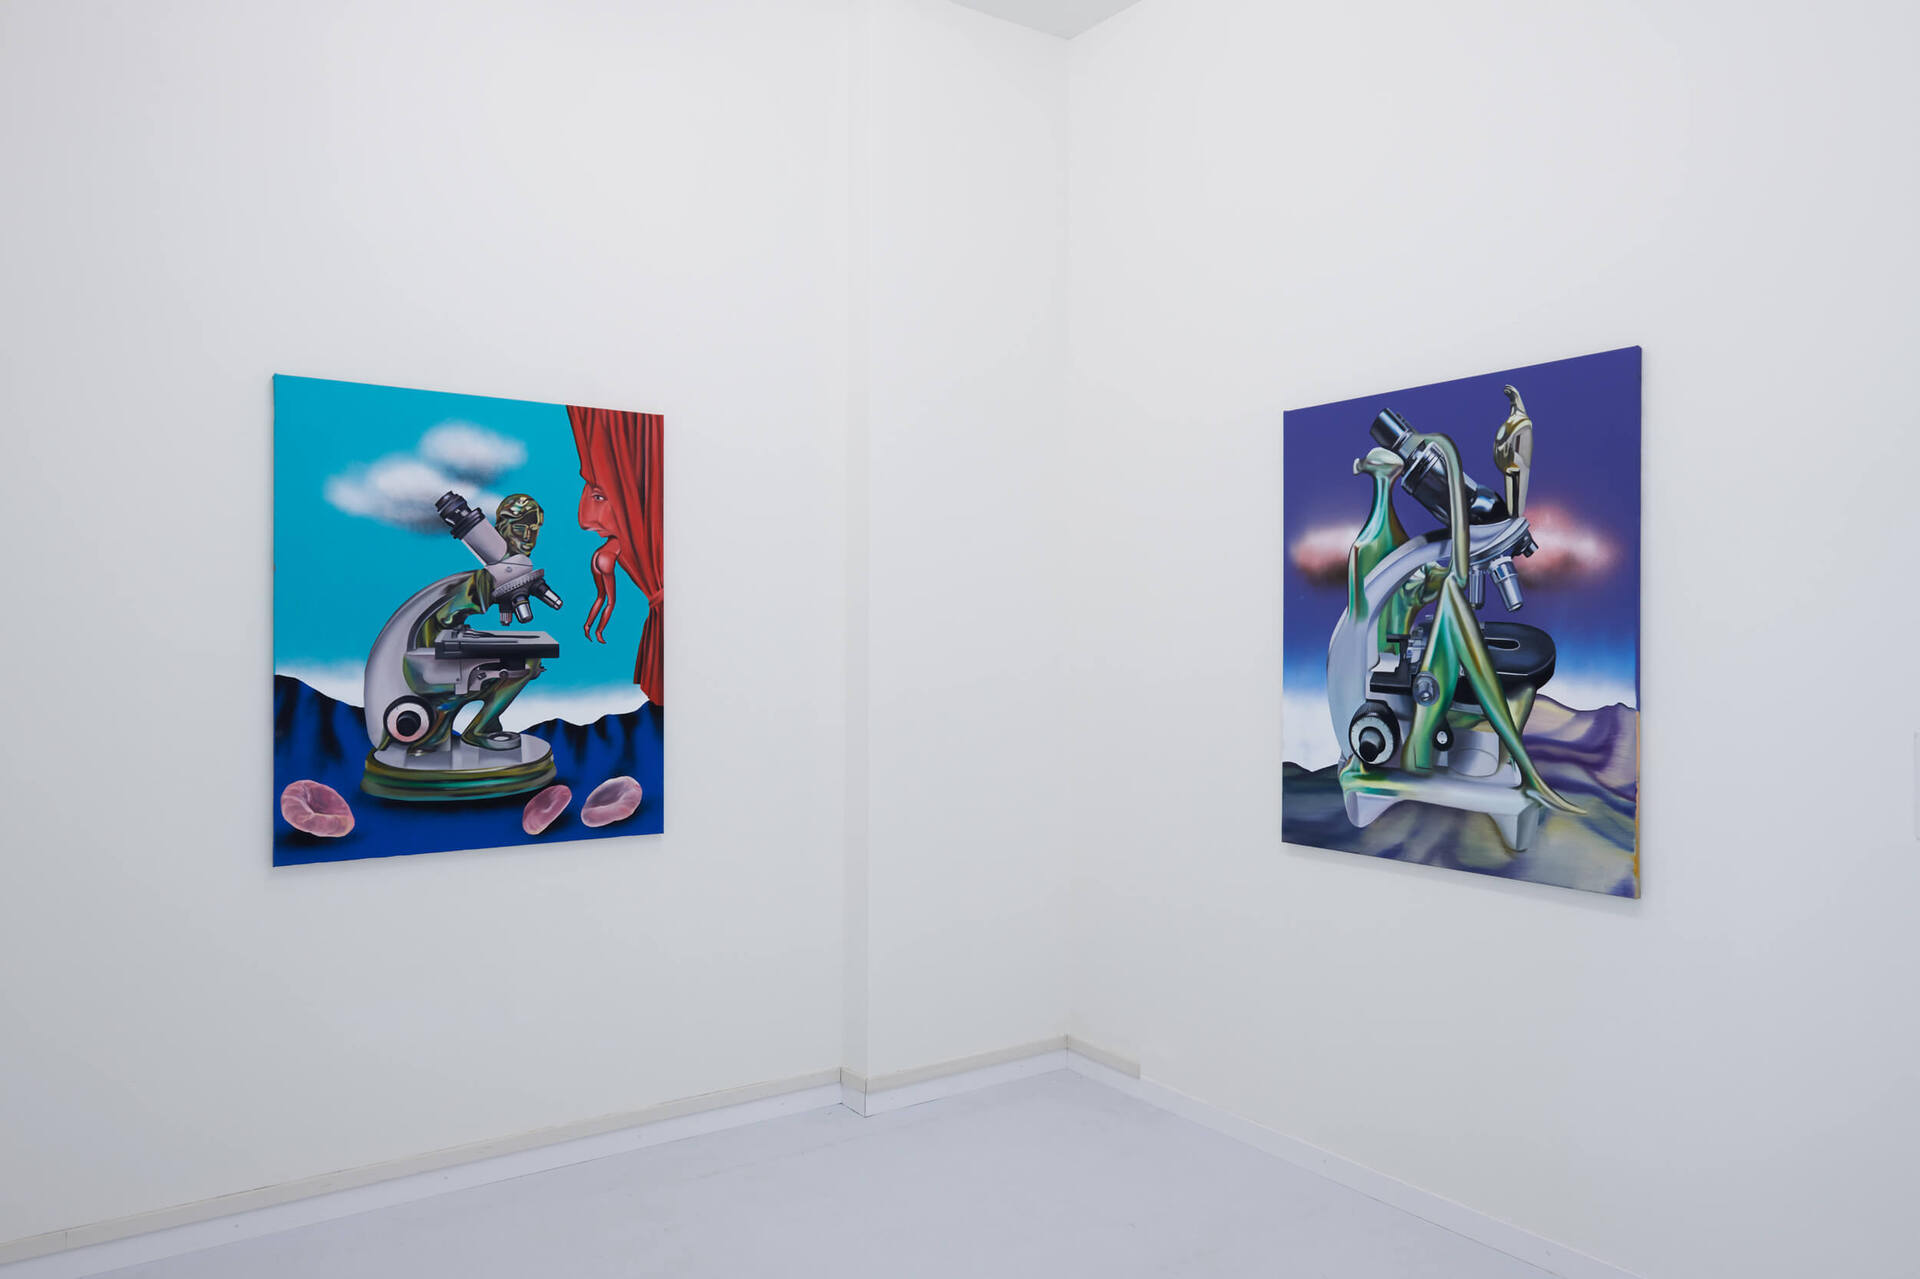 Artist: Botond Keresztesi Exhibition title: Z.I.P. – Zoom In Paintings Curated by Peter Bencze Venue: Lemoyne , Zürich Date: 20 20 August 8 – 2020 August 30 Photography: all images copyright and courtesy of Lemoyne, Zurich and Everybody Needs Art , Budapest and the artist, Photo credit: Sabina Bösch